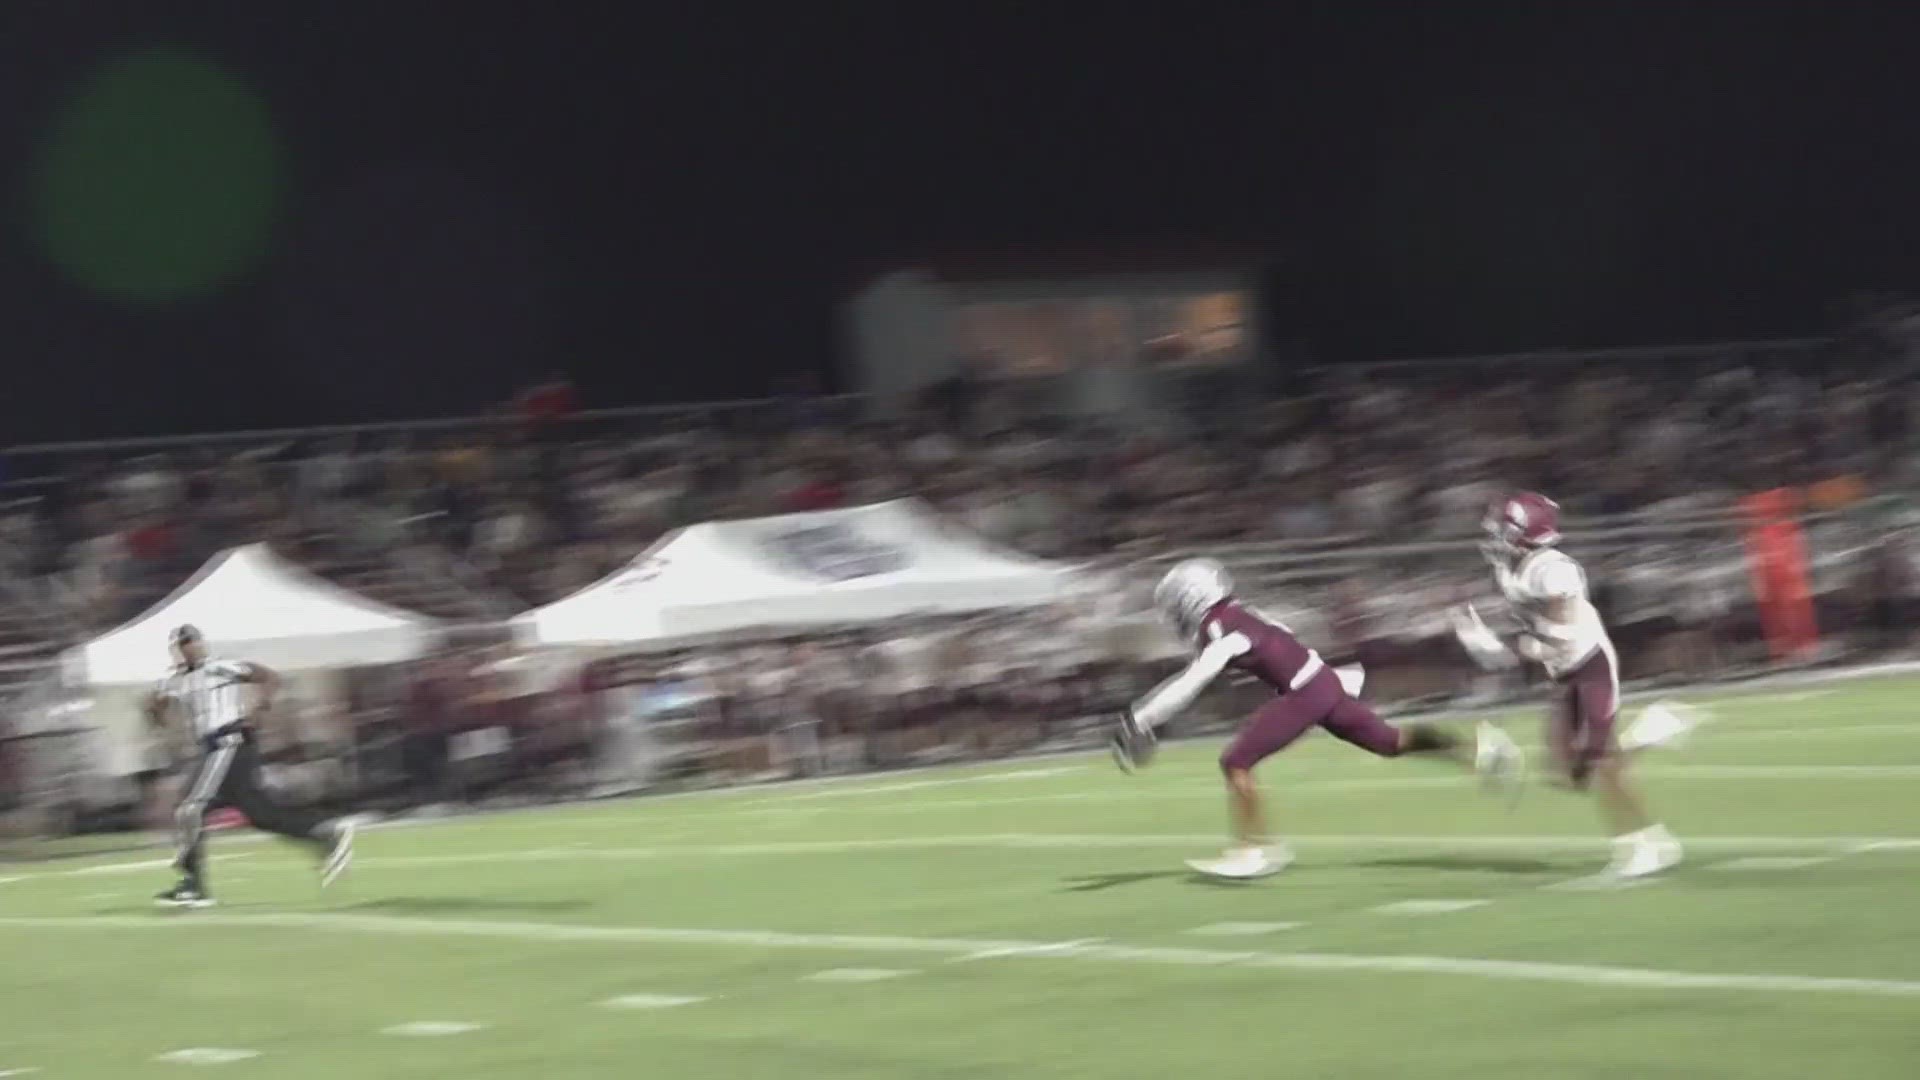 Here is your Week 2 High School Football Play of the Week and Hit of the Week.